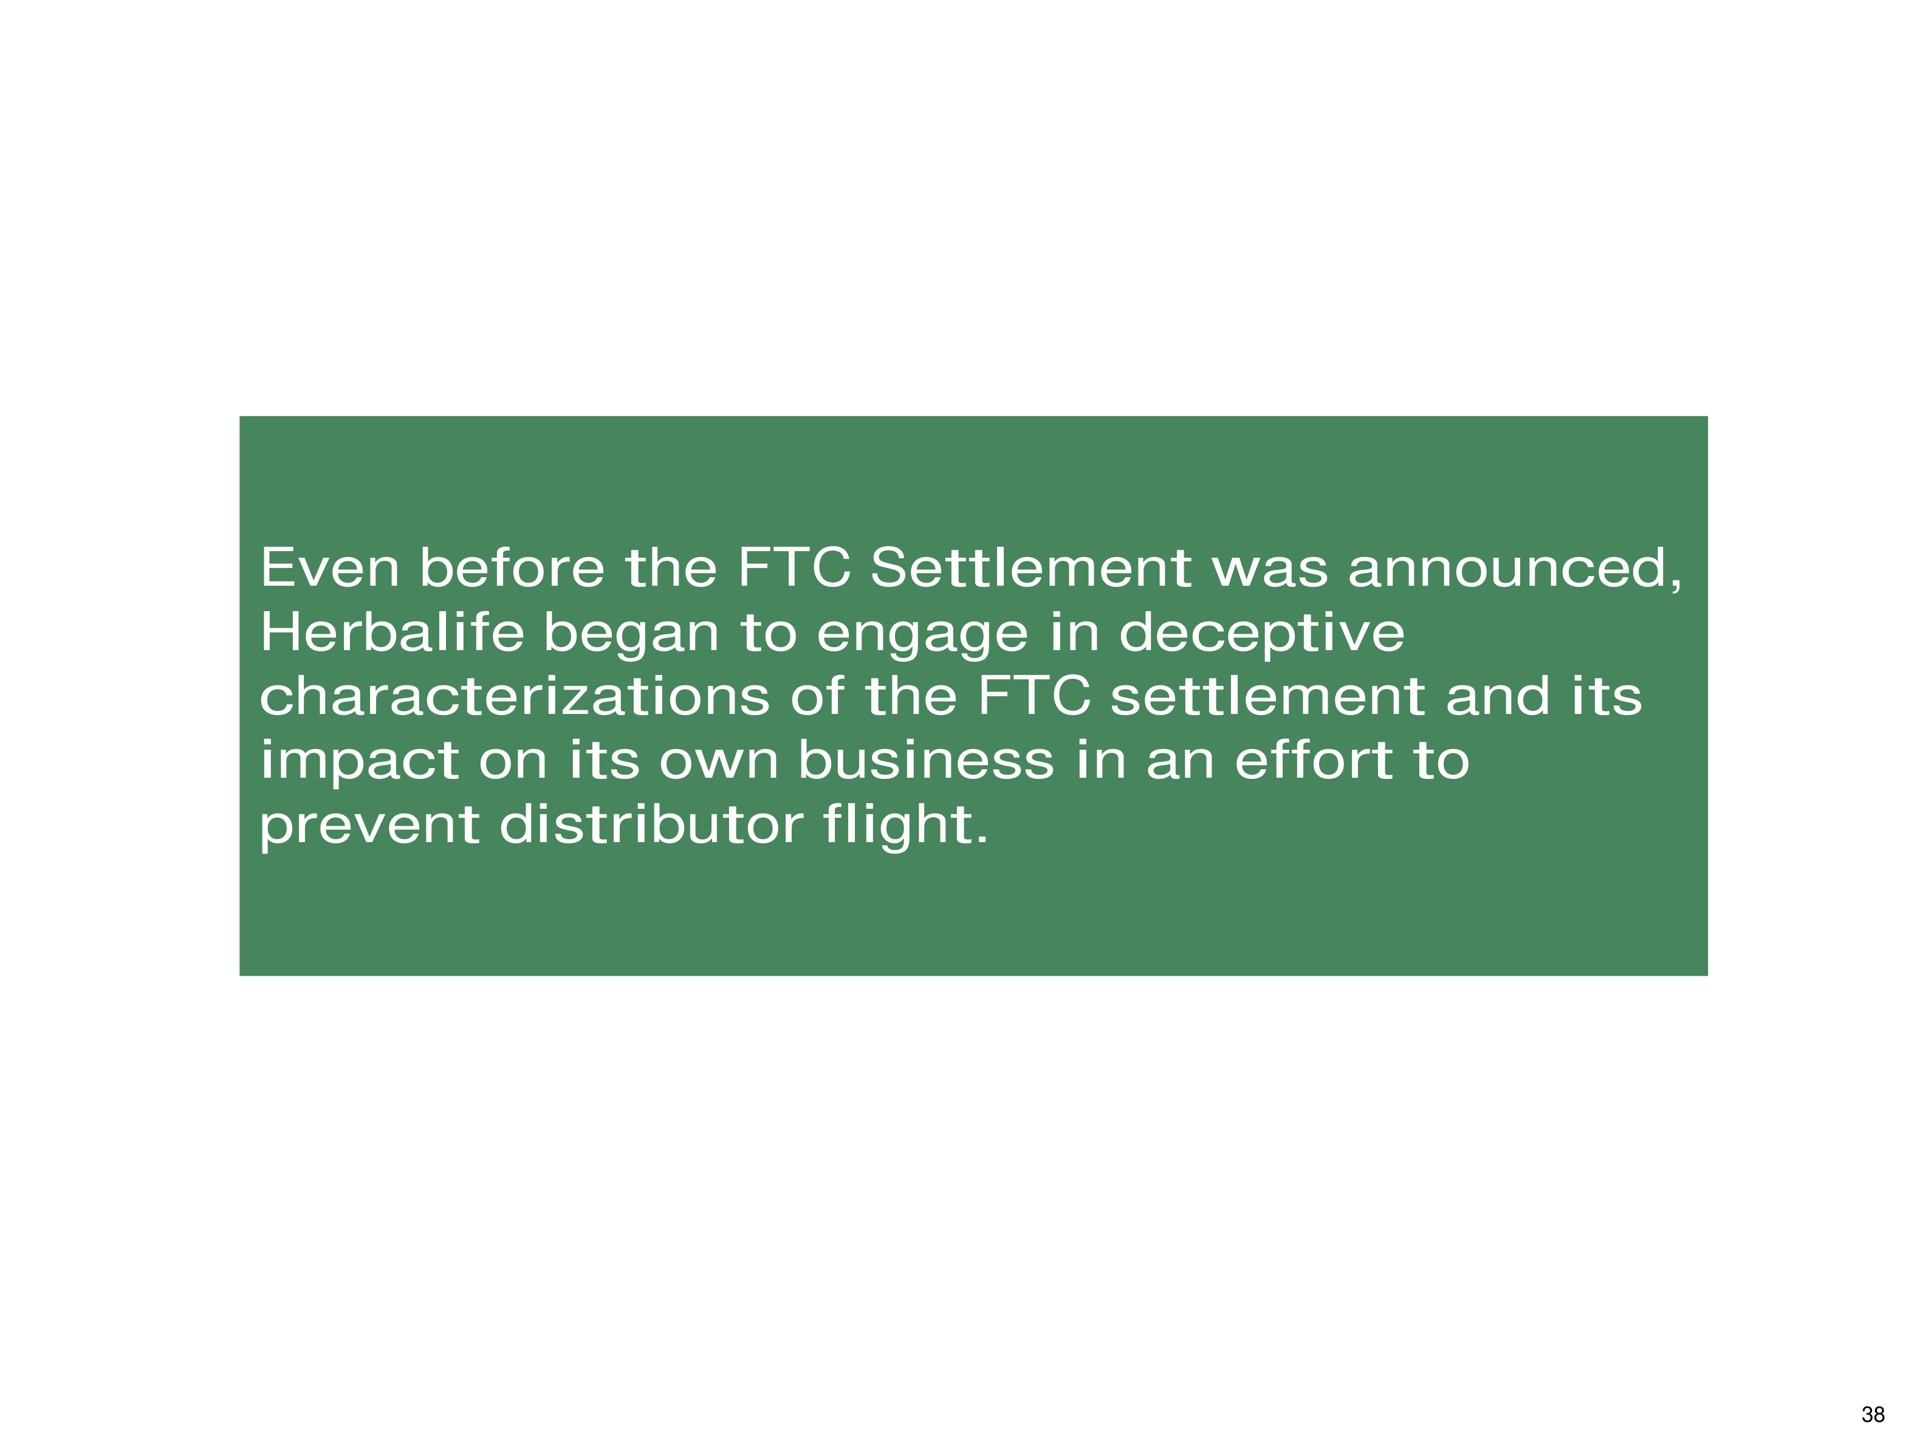 even before the settlement was announced began to engage in deceptive characterizations of the settlement and its impact on its own business in an effort to prevent distributor flight | Pershing Square